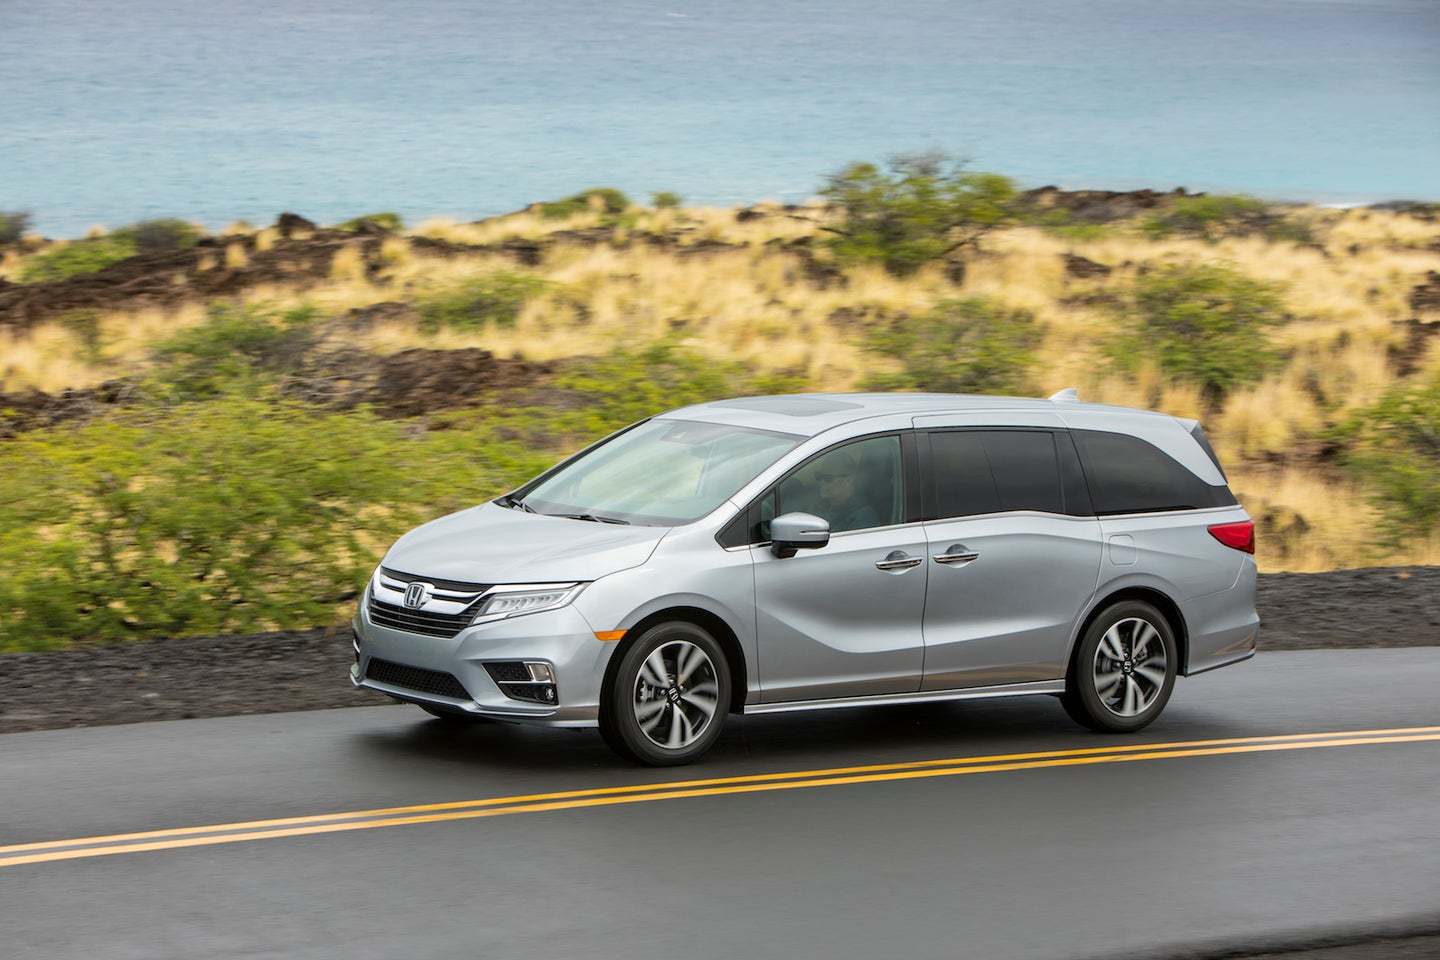 2018 Honda Odyssey Is All About a Happy Family | The Drive